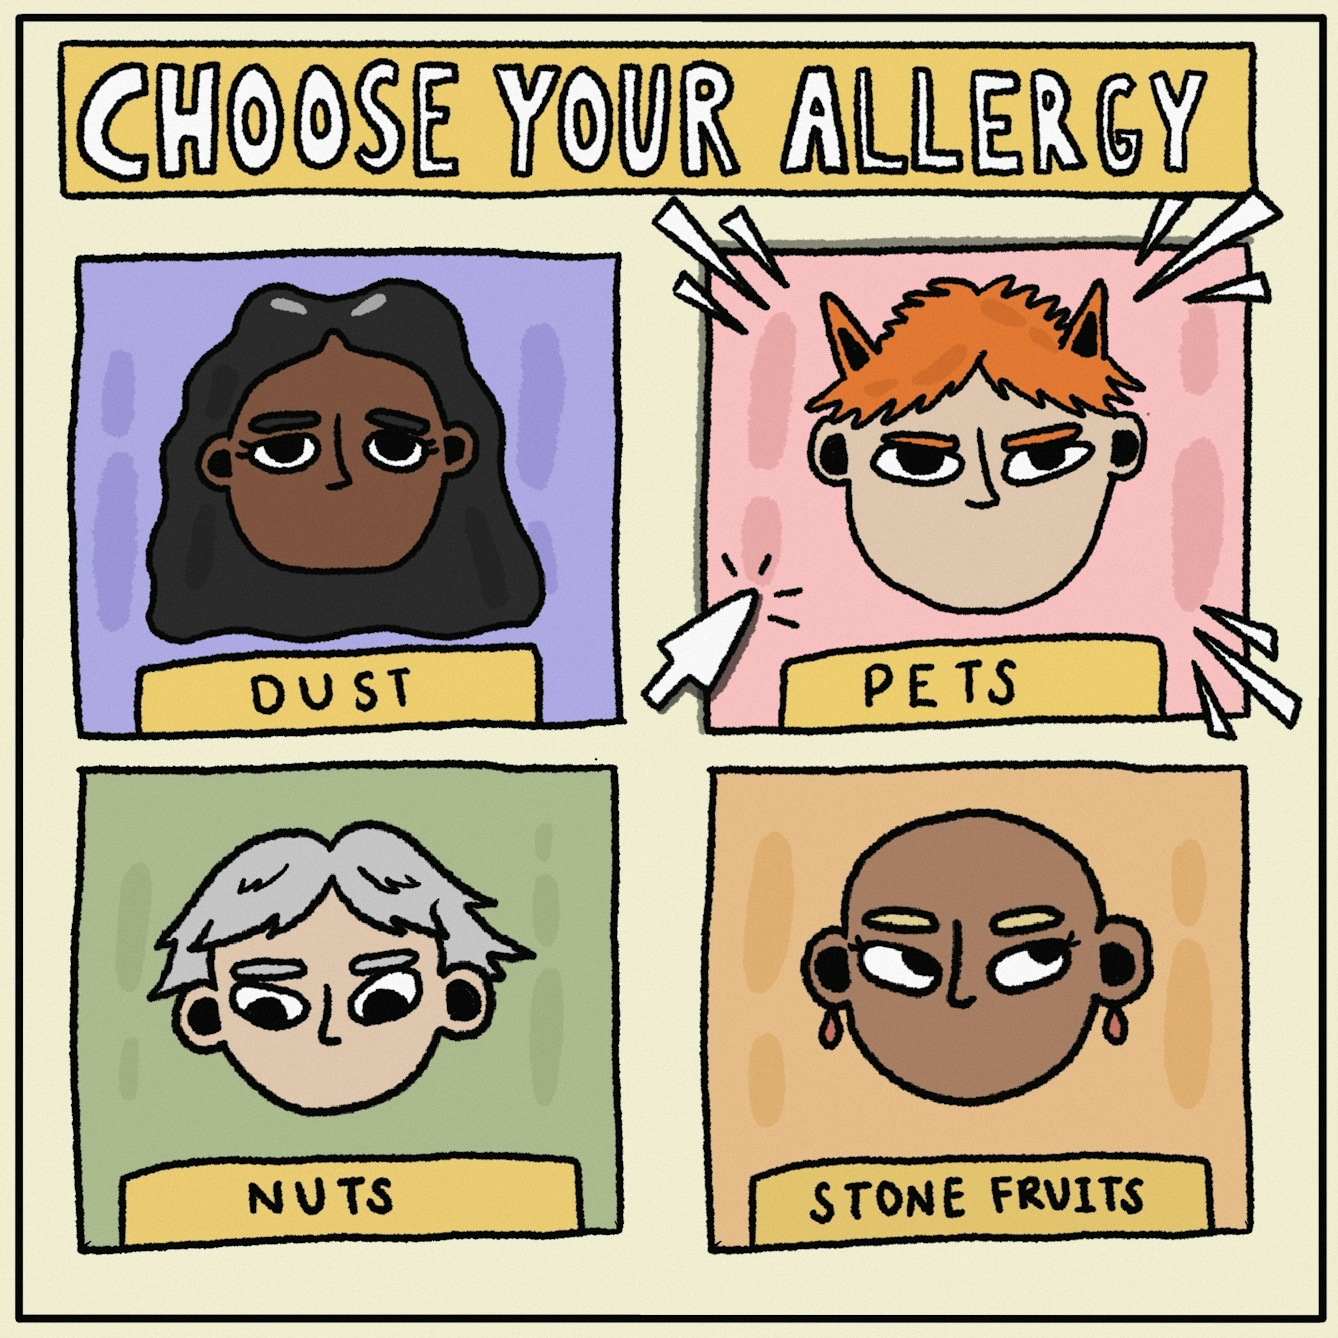 Panel 1 of a digitally drawn, four-panel comic titled ‘Zoning’. The text at the top reads “CHOOSE YOUR ALLERGY”. The box in the top right is labelled ‘PETS’ and, in it, is a character with furry, orange hair and orange eyebrows. A cartoon cursor is clicking over this box to signal this is the allergy you have chosen. 